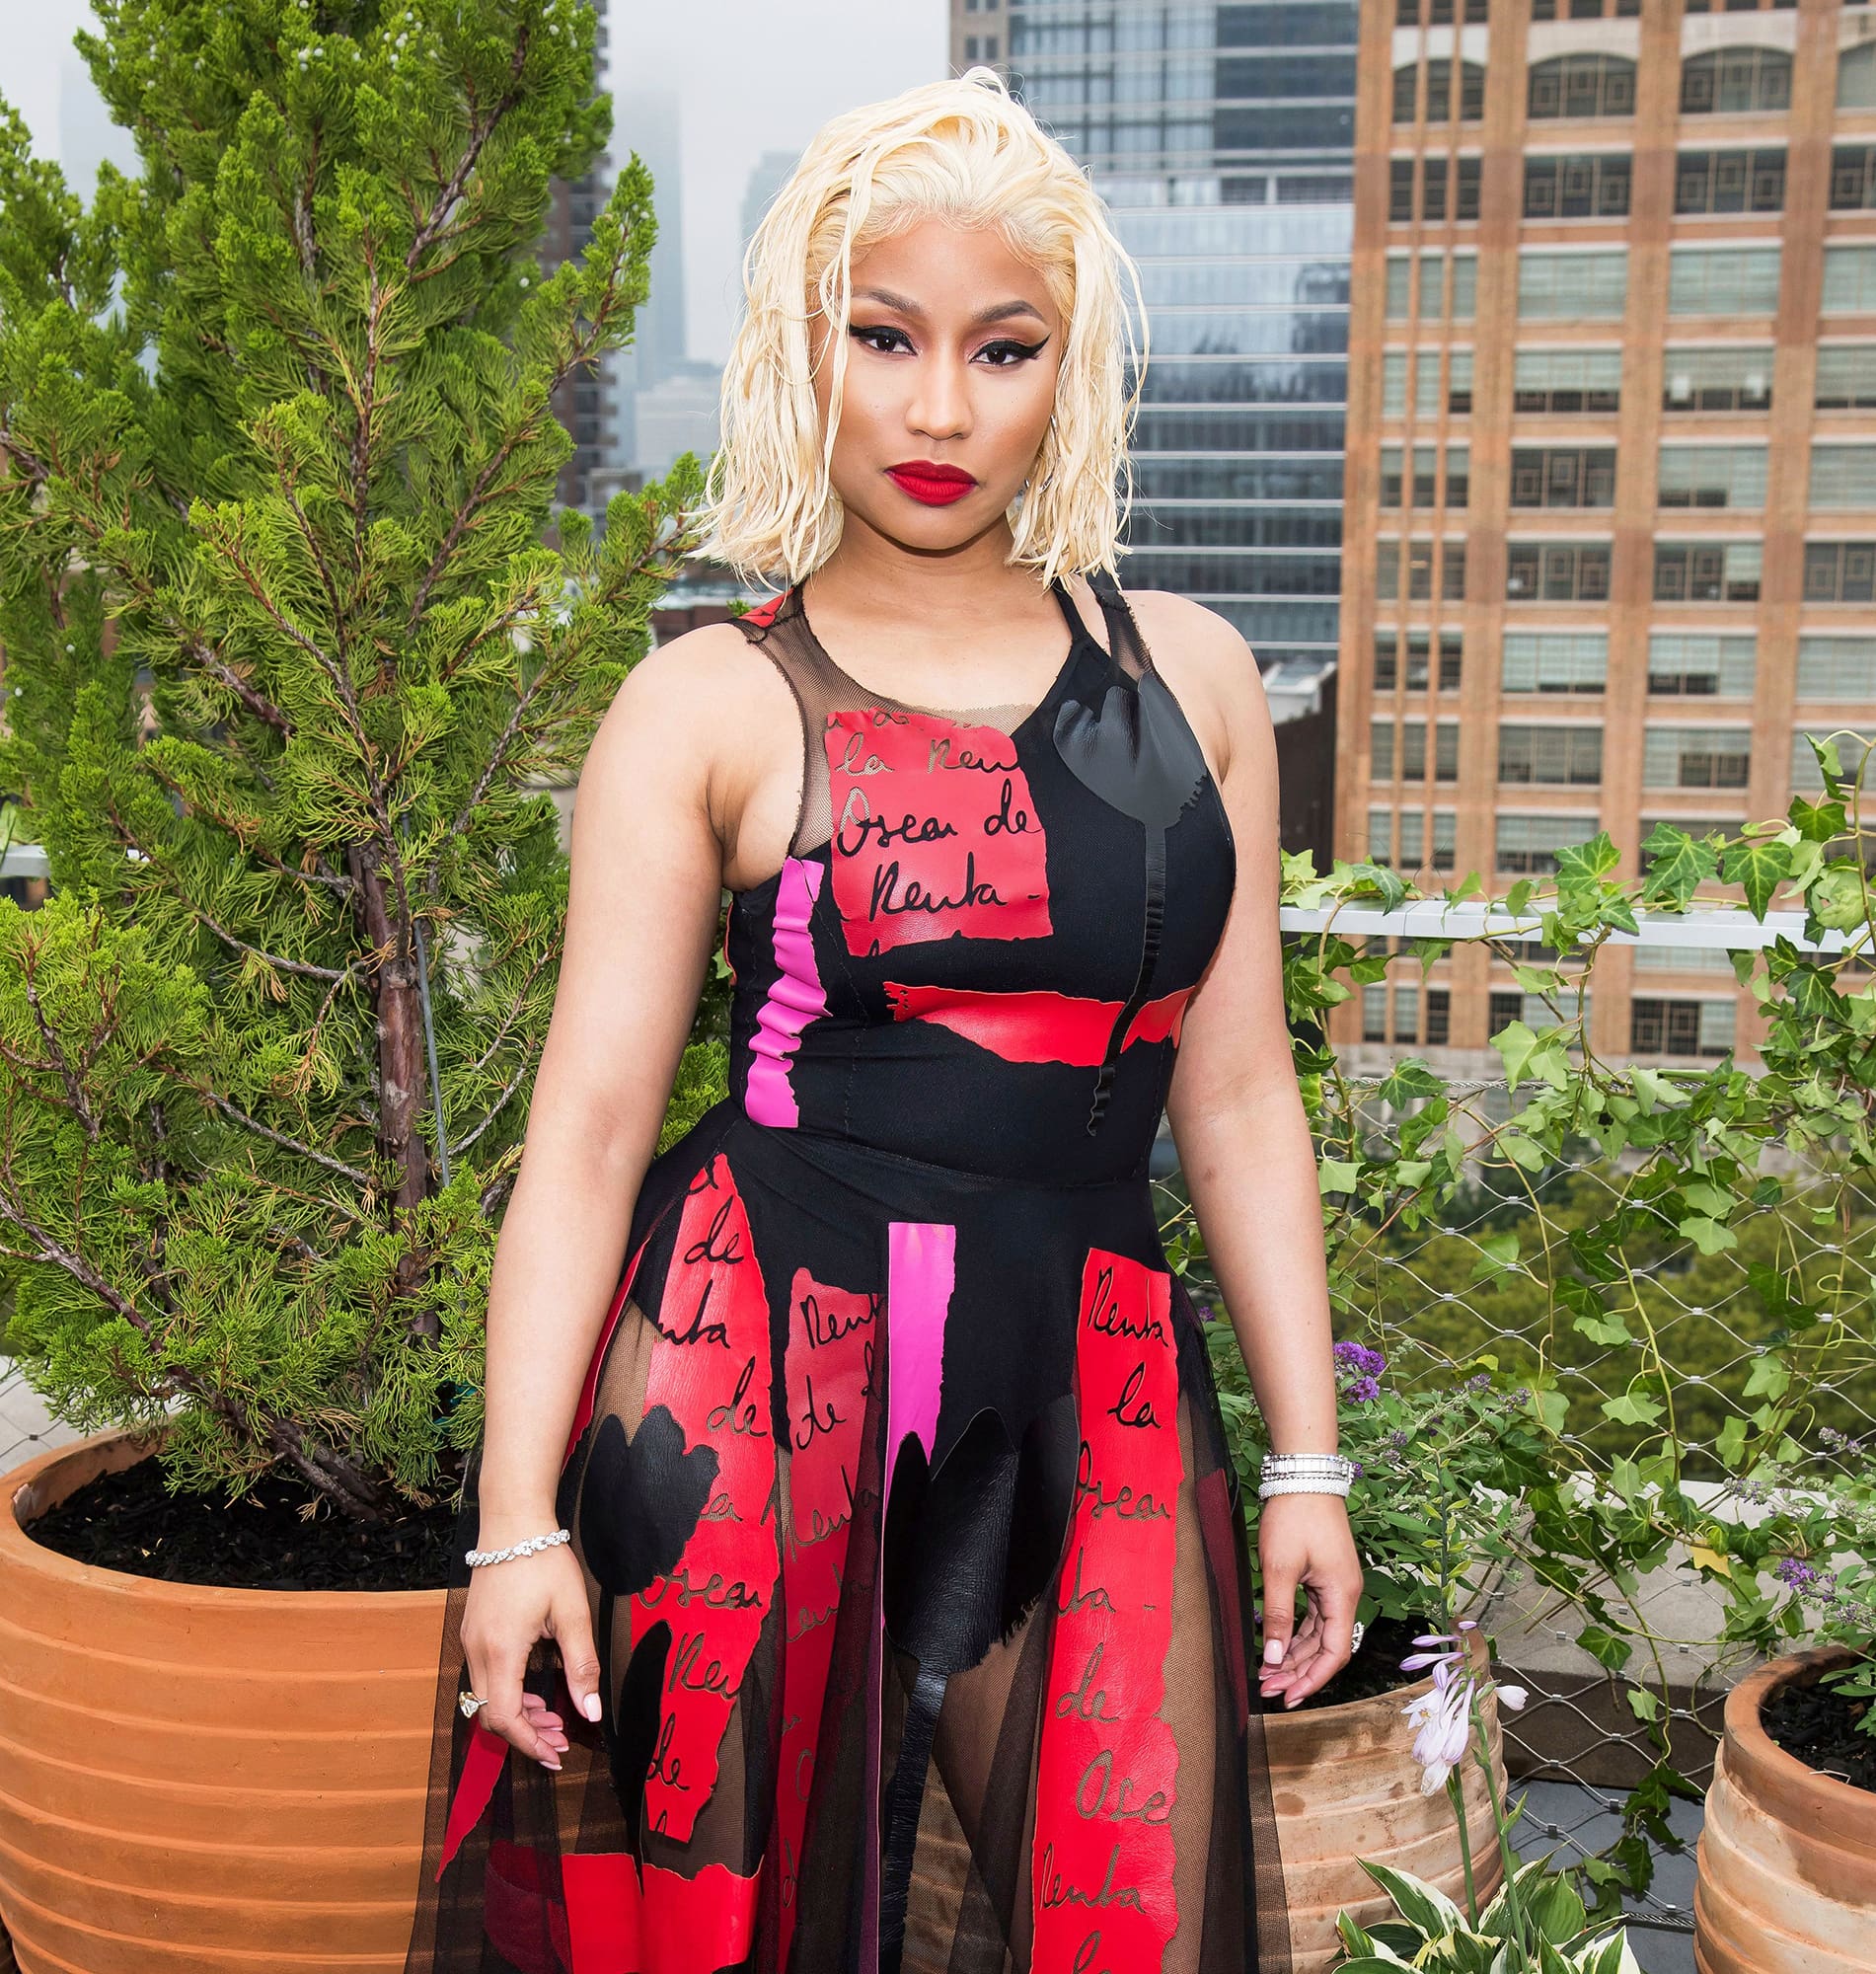 Nicki Minaj Offers Fans A Glimpse Of Her Collaboration With Fendi - Fans Say She's Pulling A Rihanna